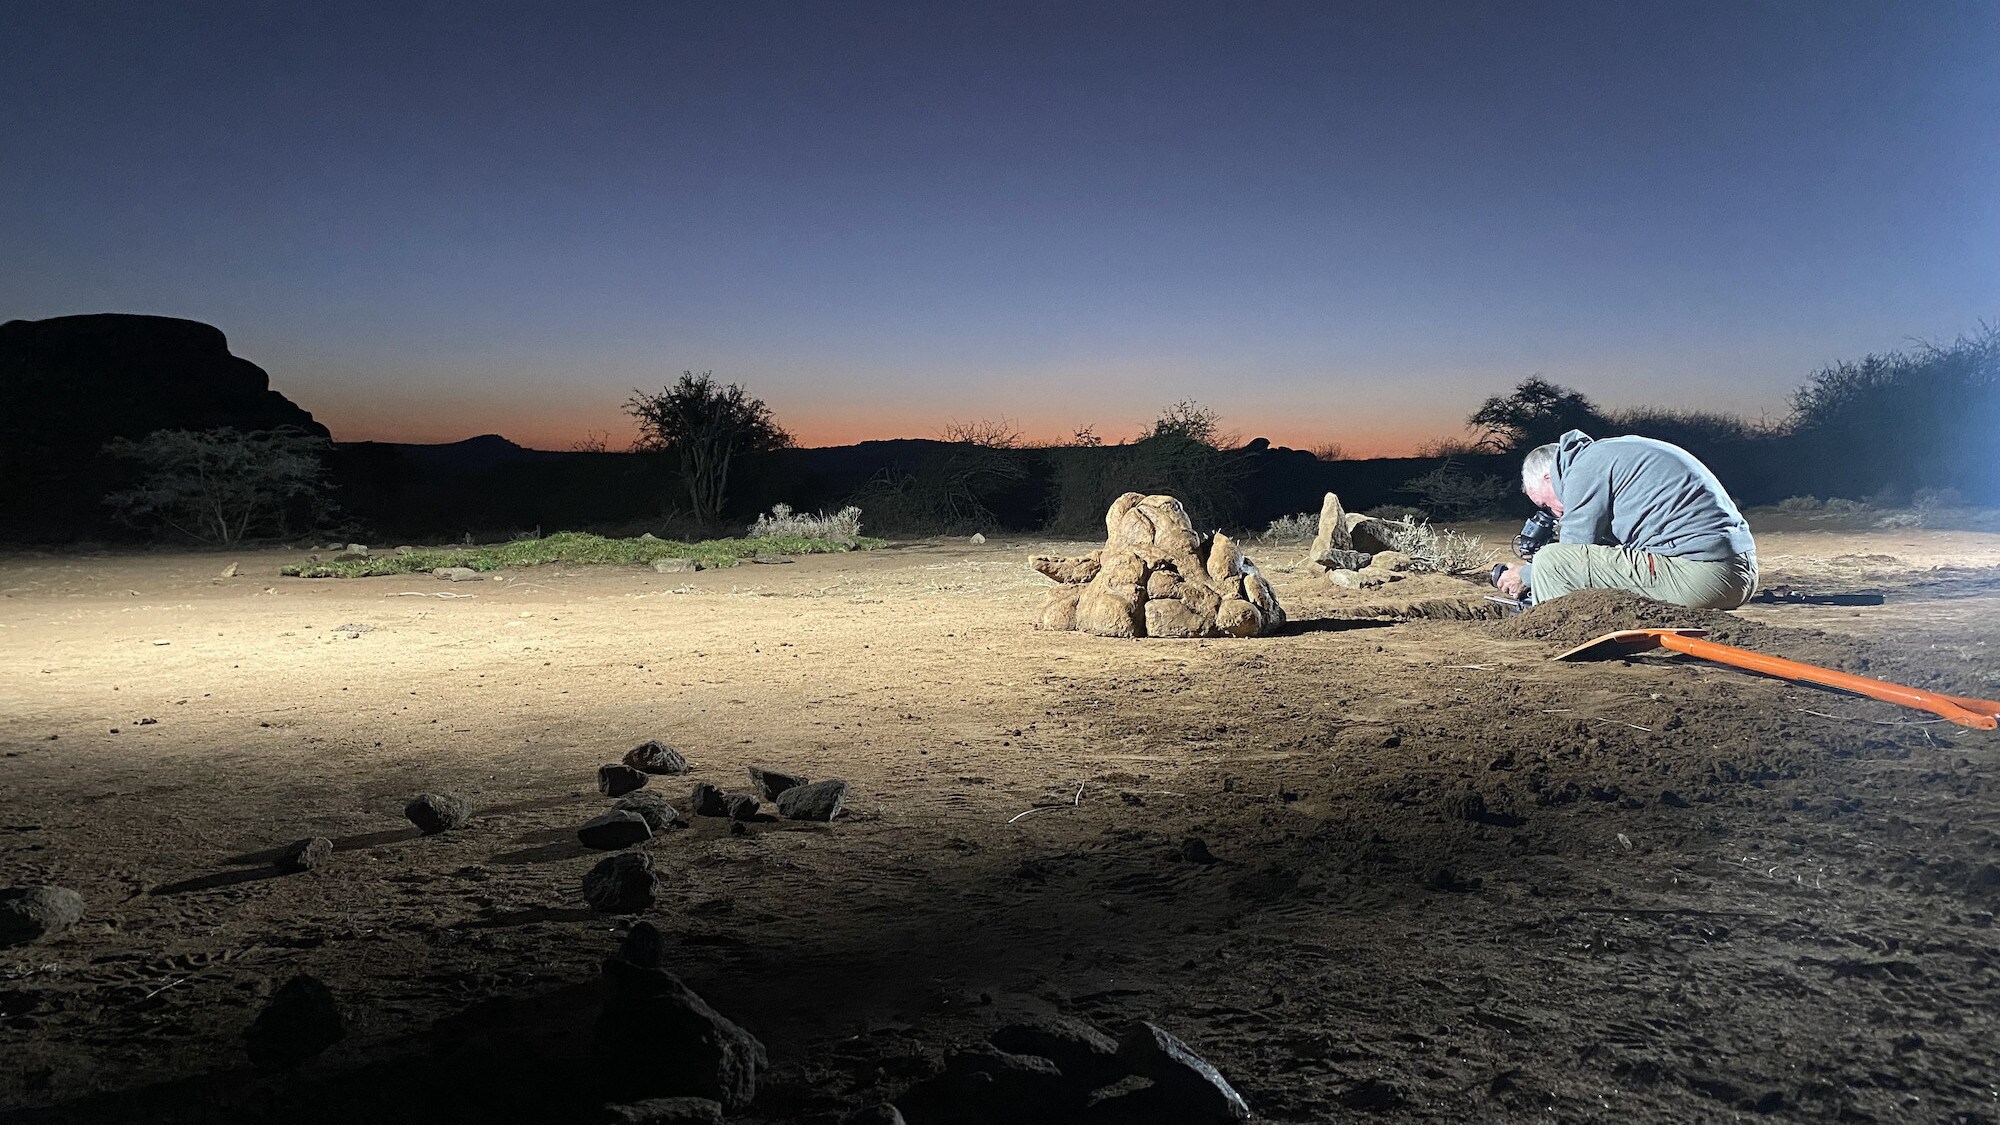 Director of Photography Chris Openshaw films a mini "Pride Rock" at dusk at the Mpala Research Centre, Nanyuki, Laikipia, Kenya for the "Land of Giants" episode of "A Real Bug's Life." (National Geographic/Amy Gilchrist)